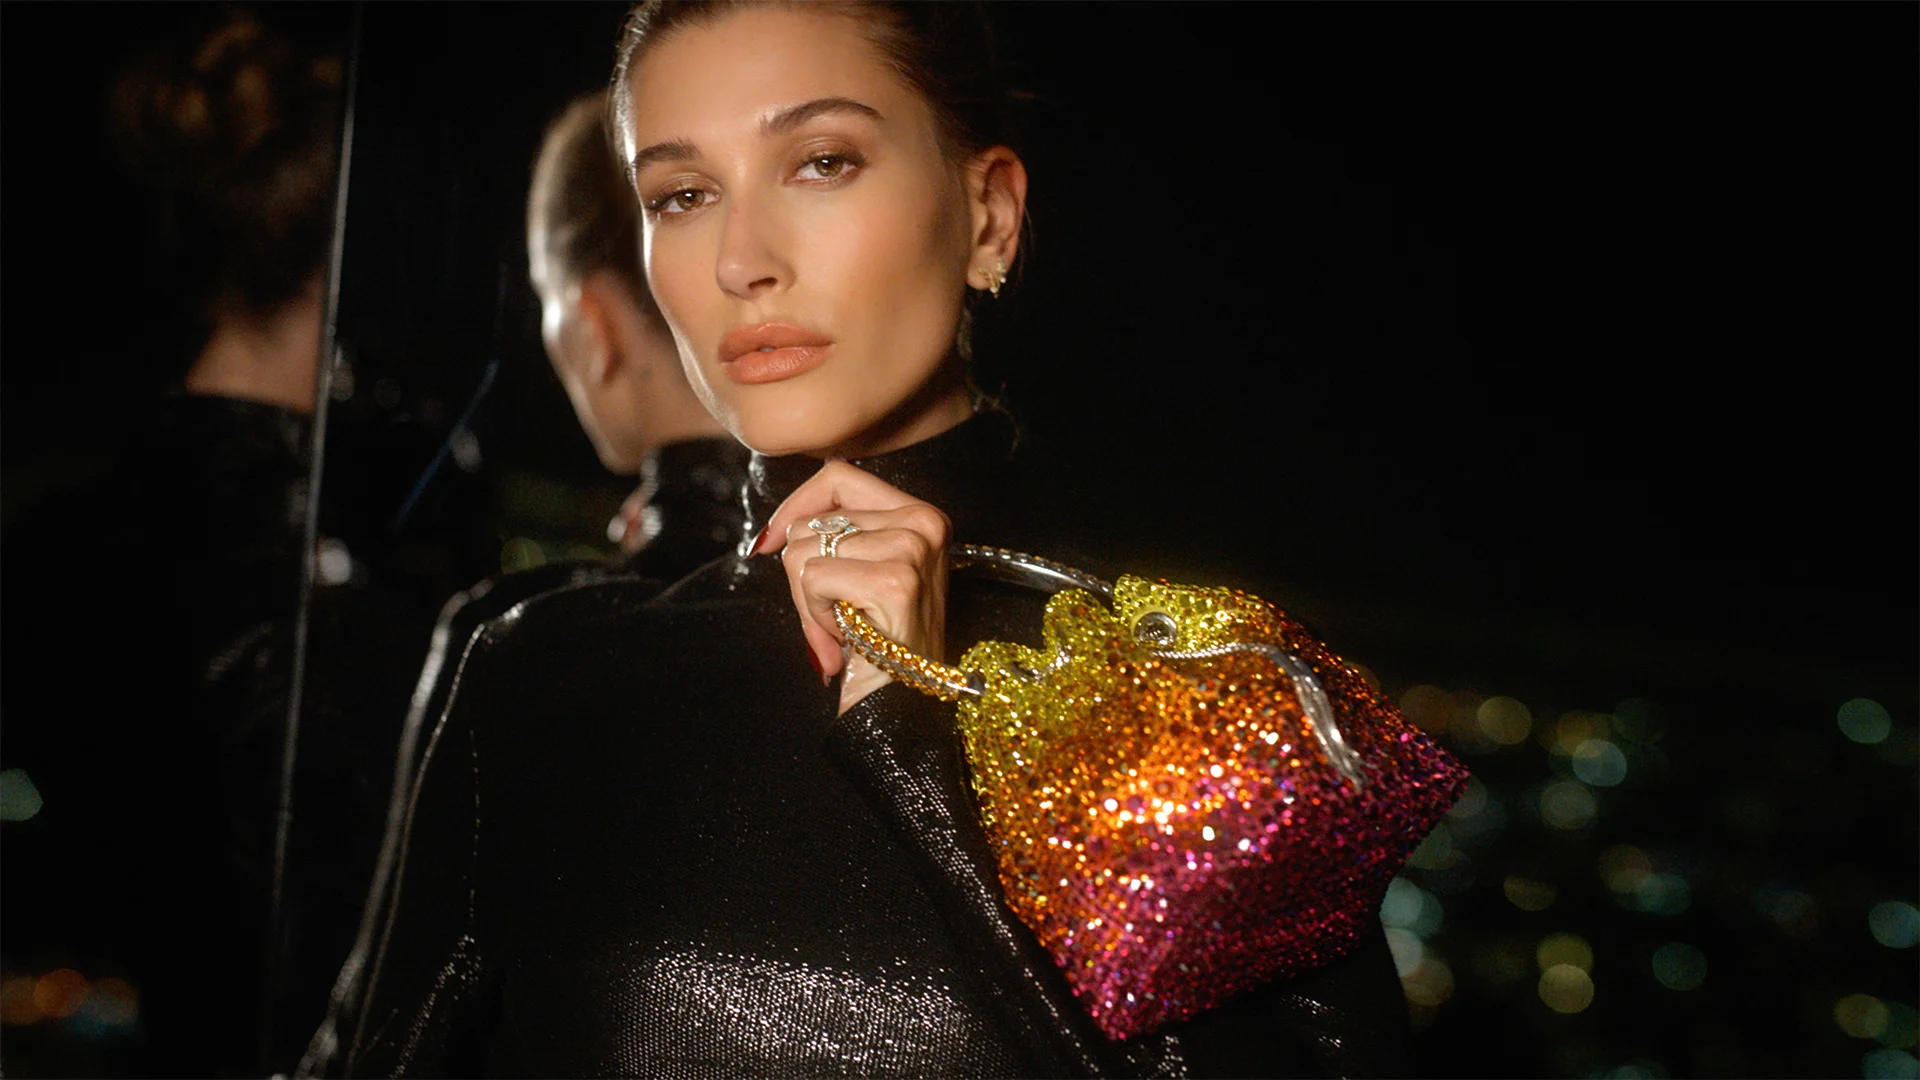 Hailey Bieber is the Face of JIMMY CHOO Winter 2021 Collection